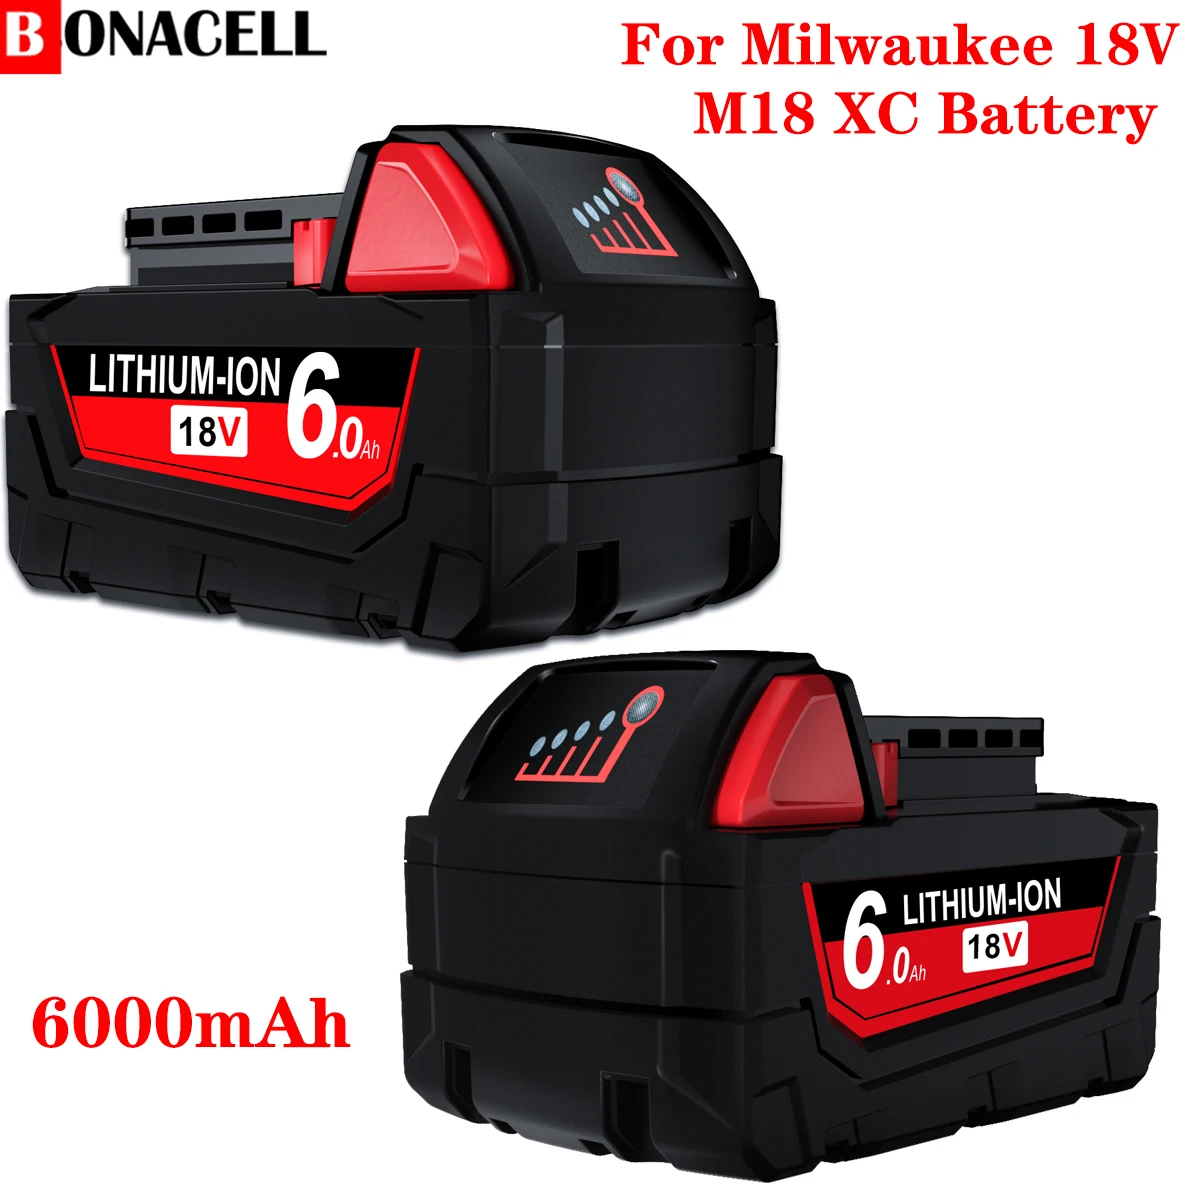 

For Milwaukee M18 9.0/6.0Ah 18V M18 Power Tools Rechargeable Li-ion Battery Replacement 48-11-1815 48-11-1850 48-11-1840 Z50